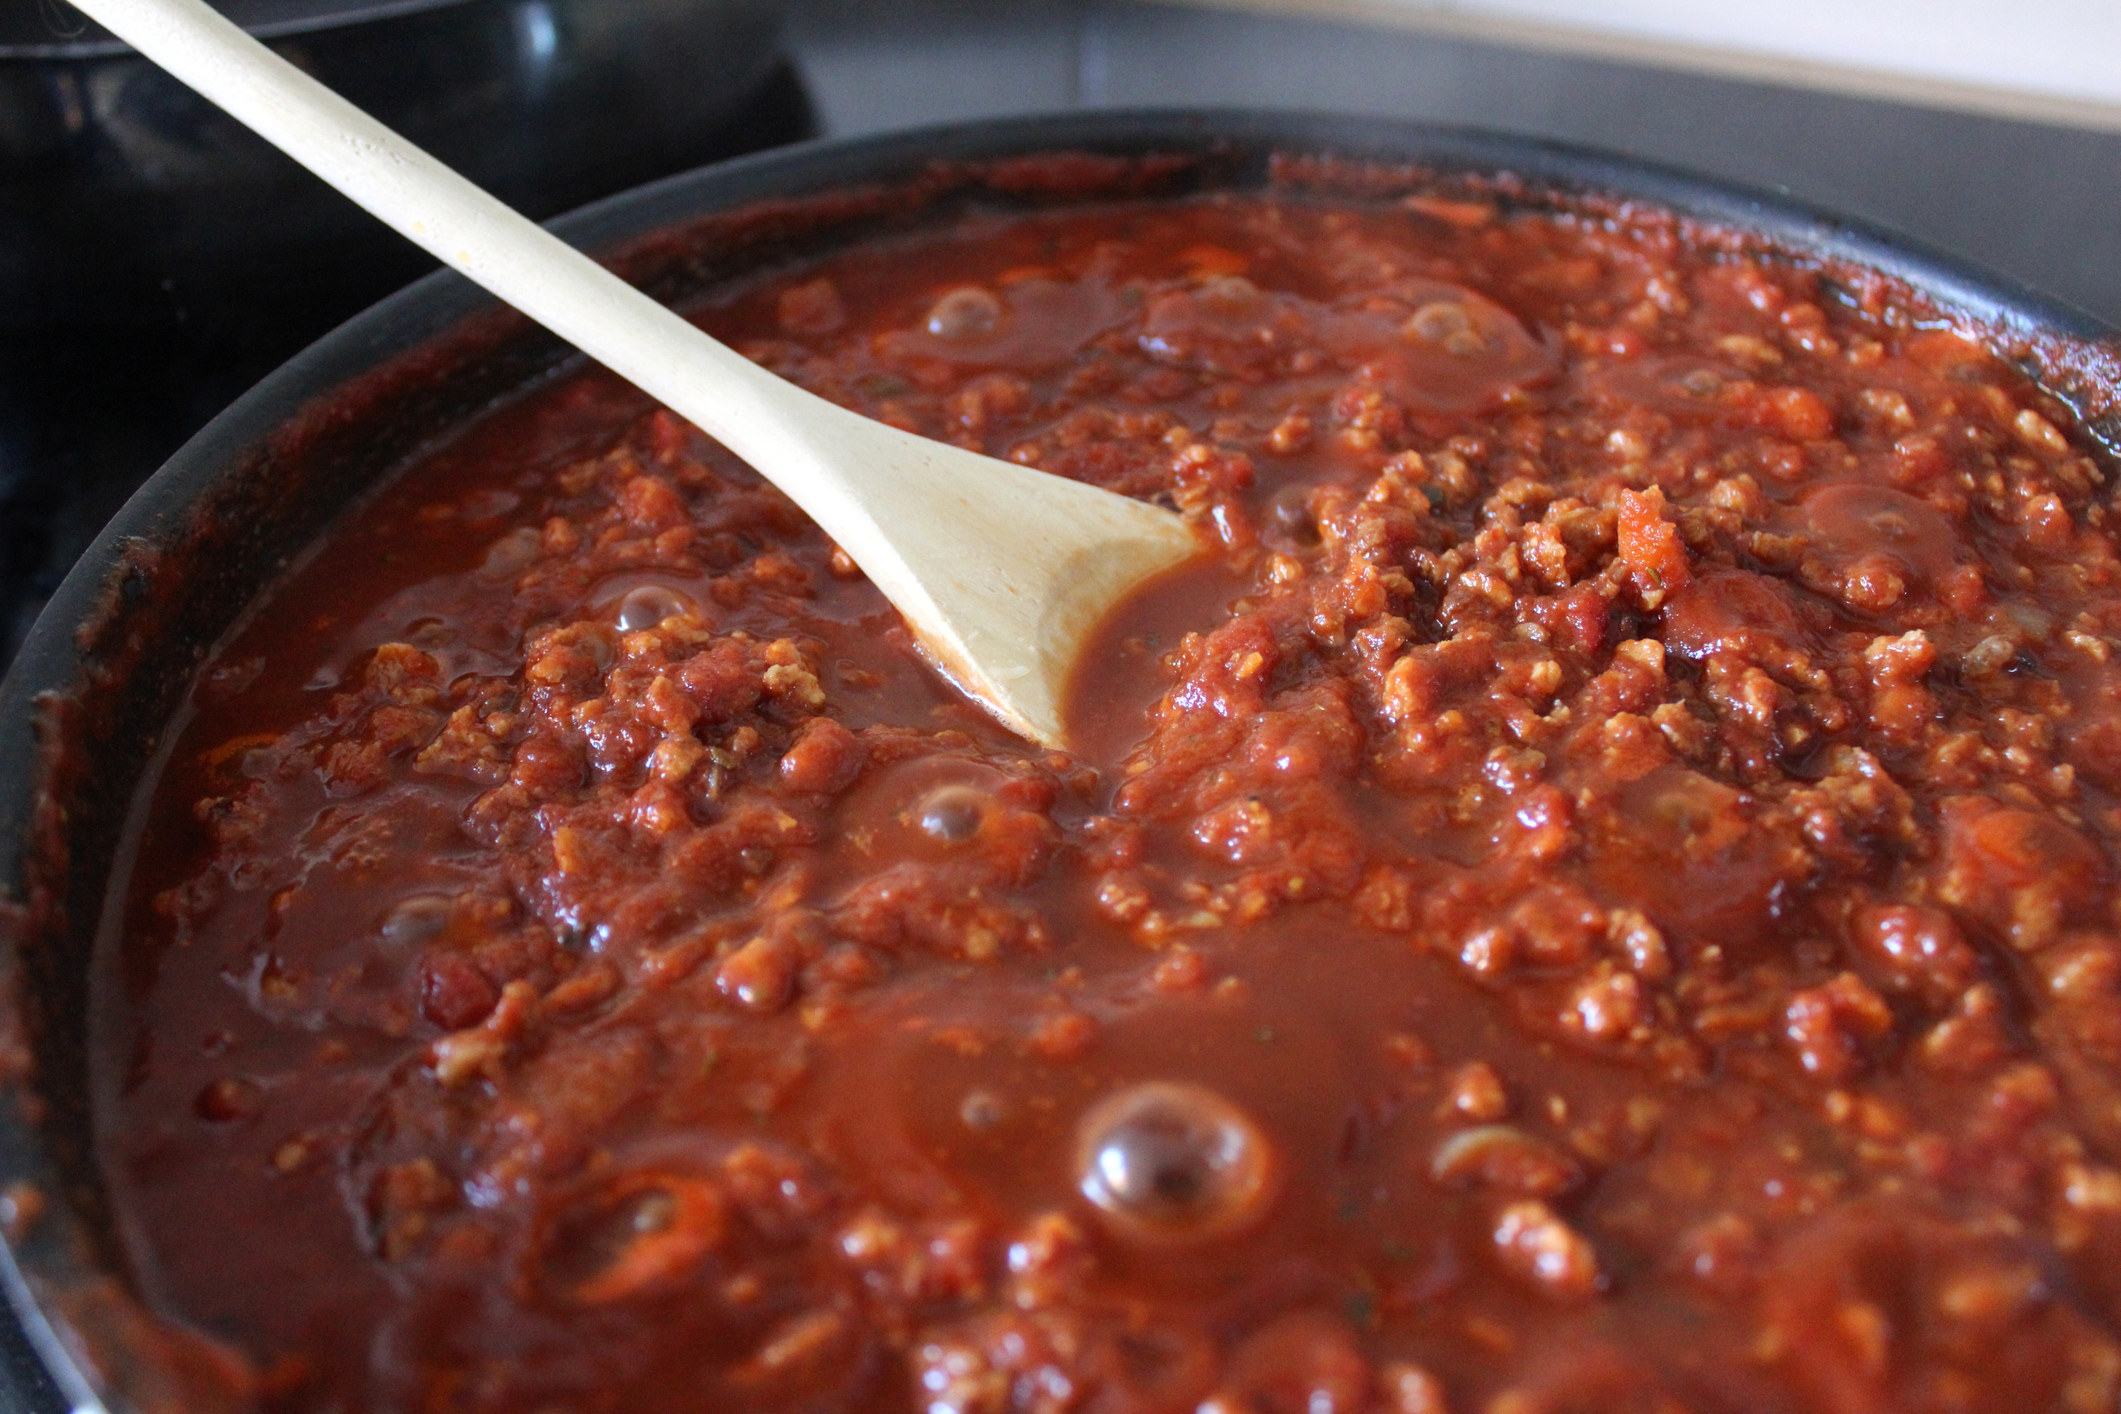 A wooden spoon stirring Bolognese sauce